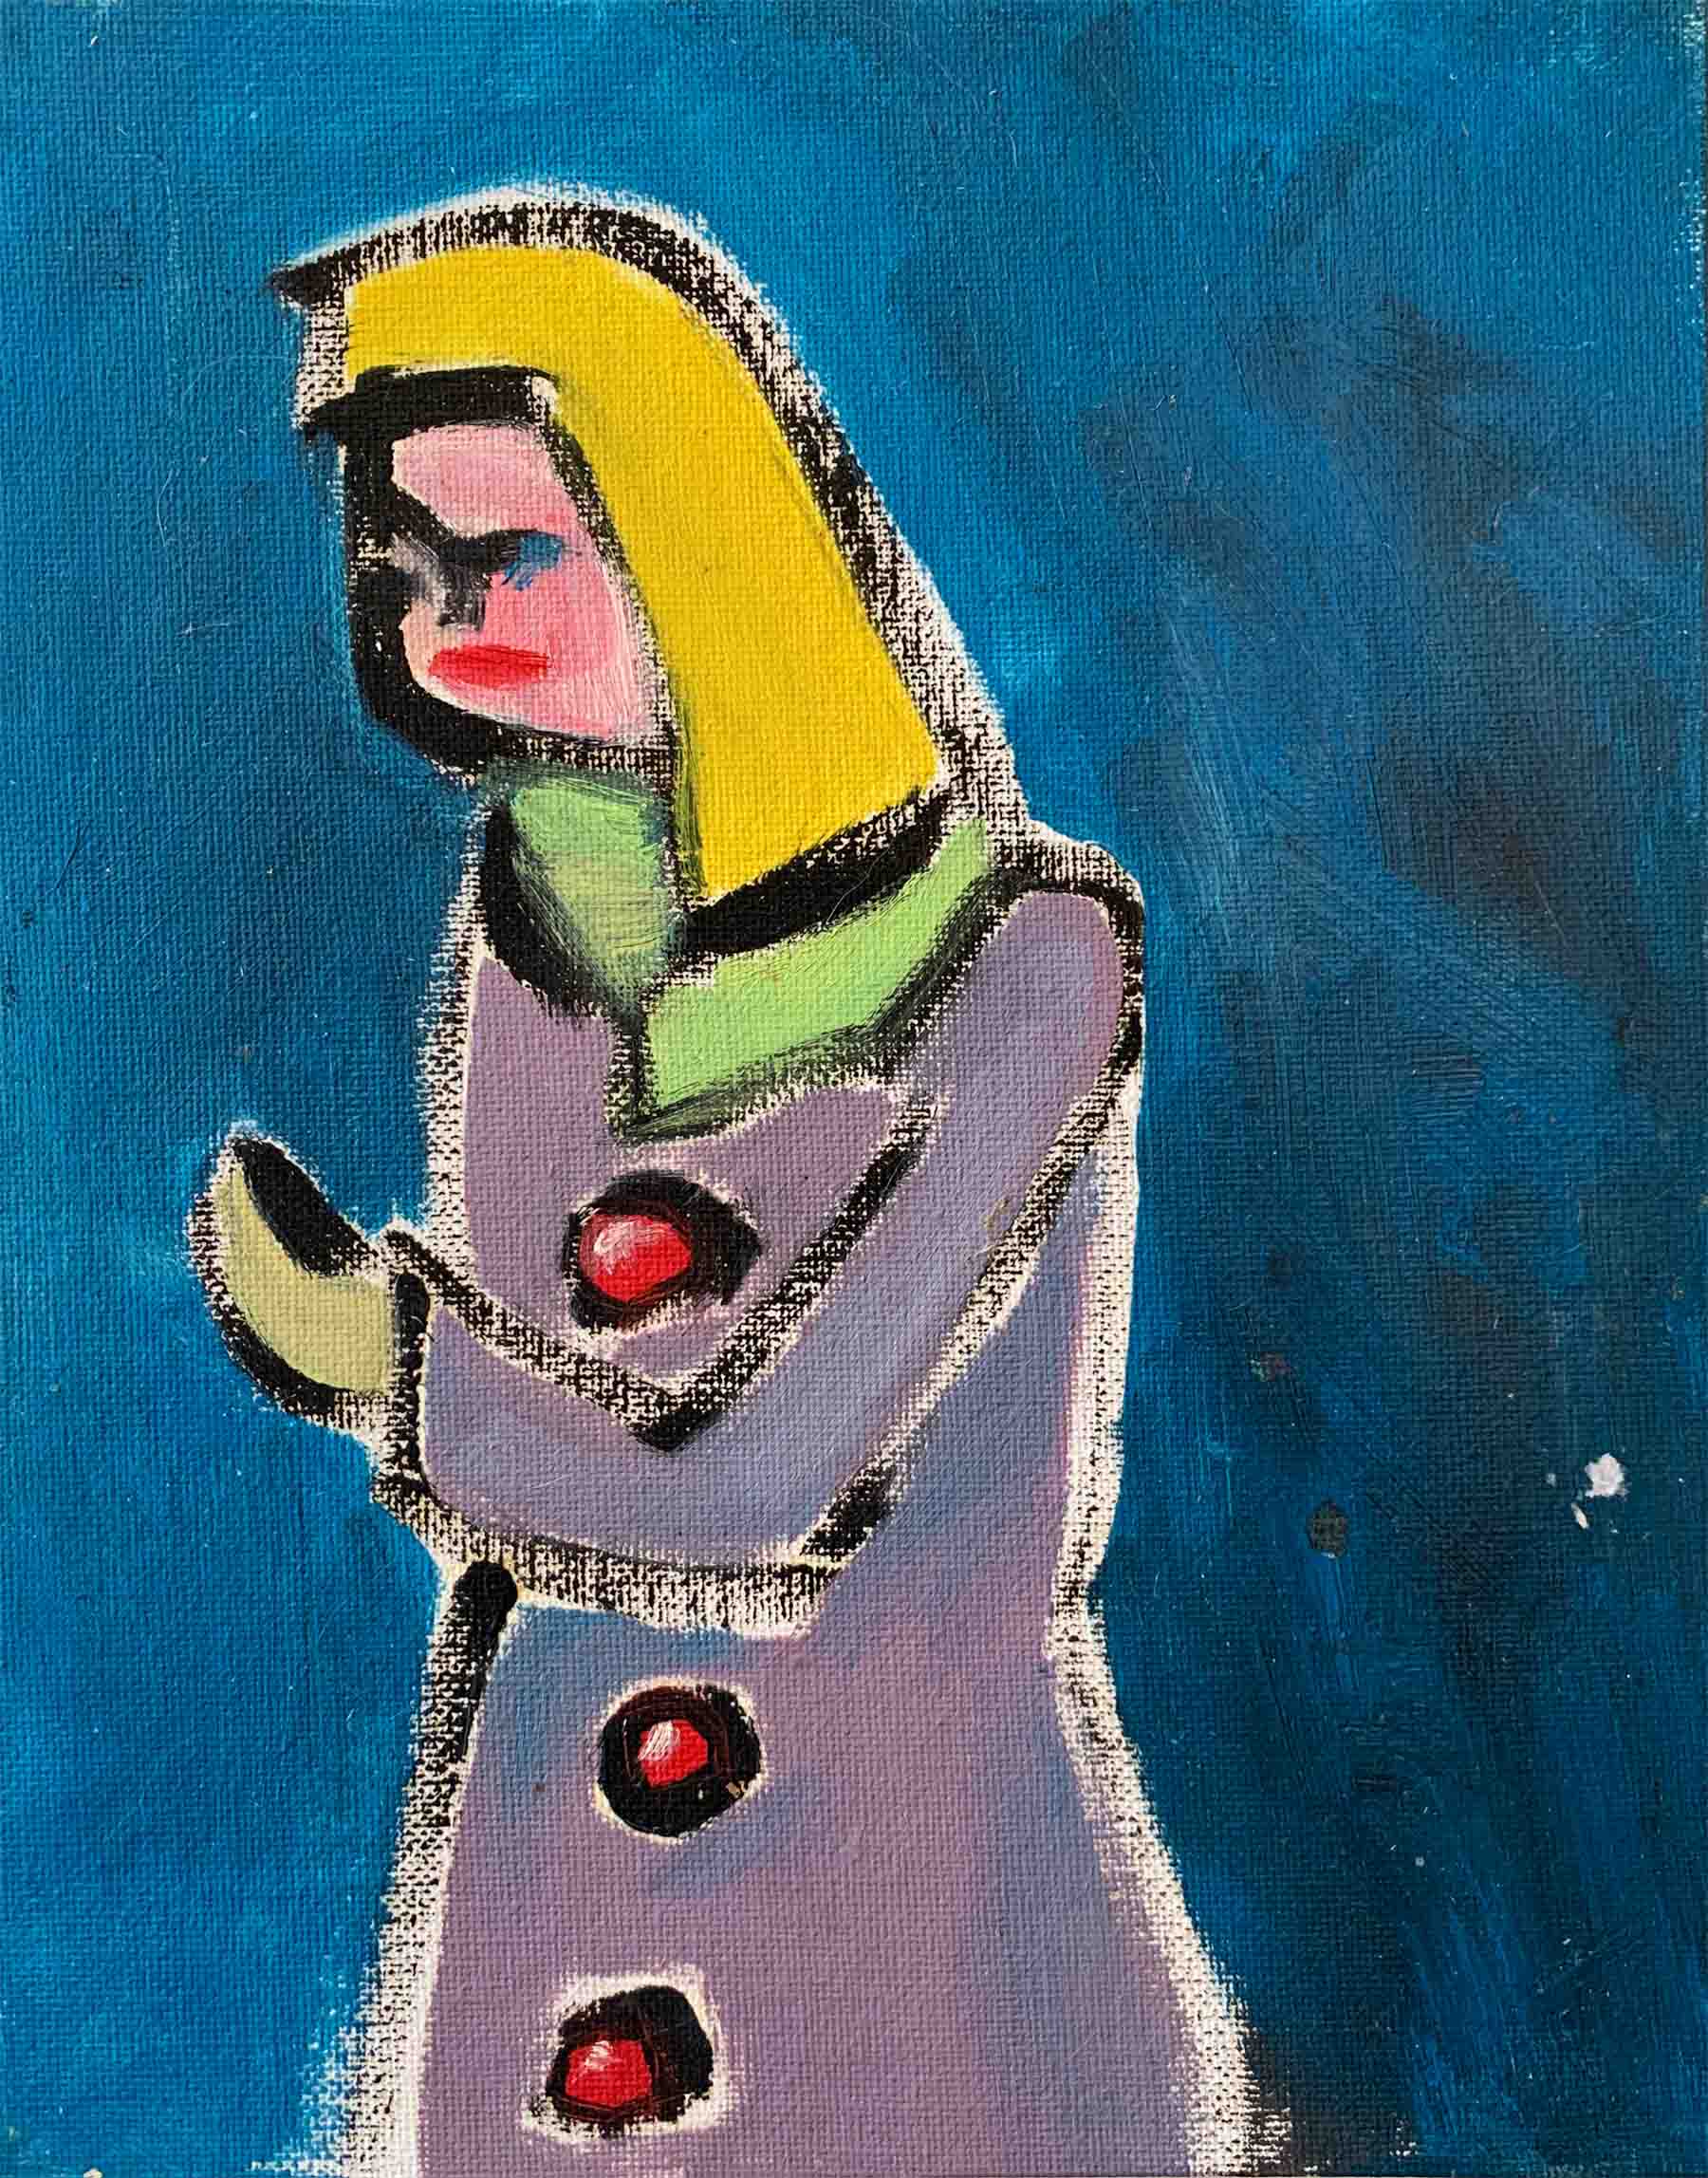 art every day number 556 / painting / the purple coat